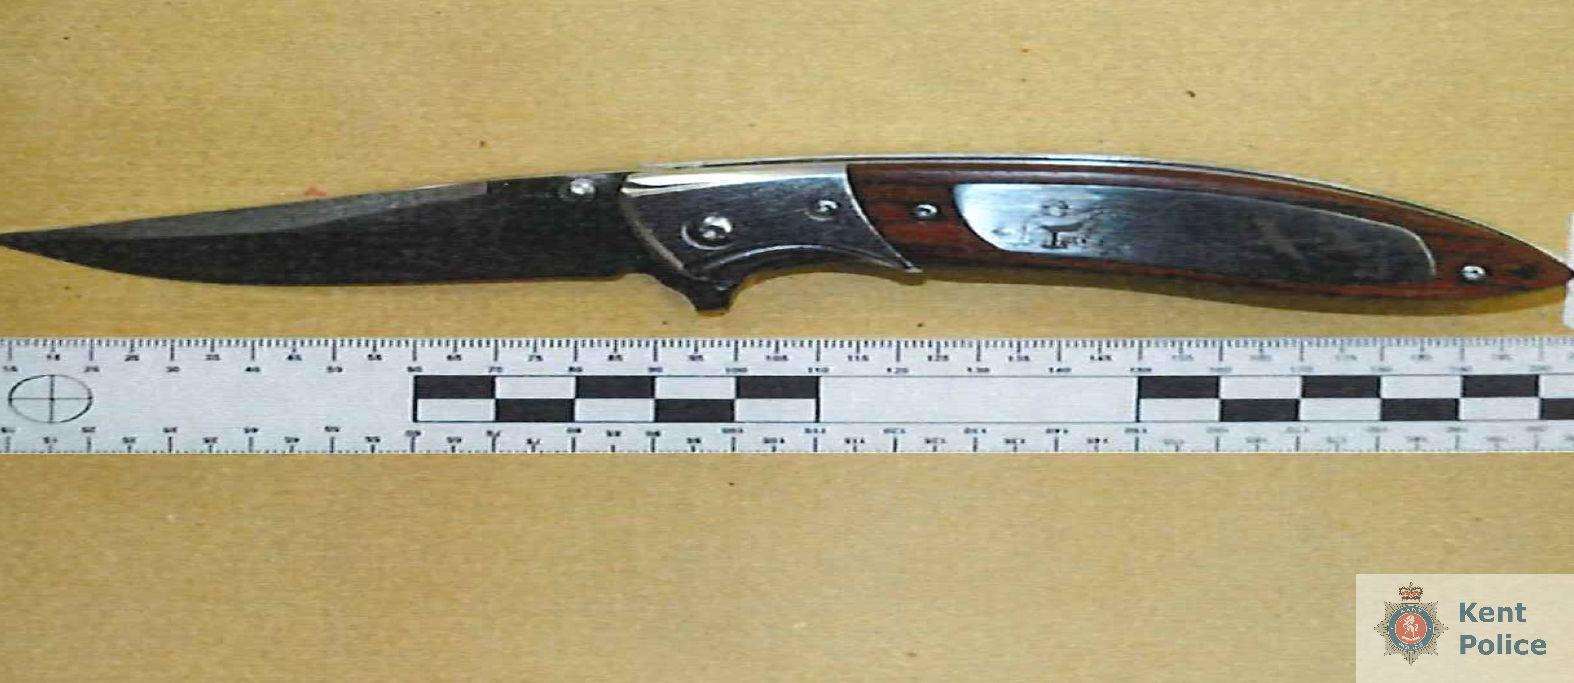 When searched, Michael Dunn was found to be carrying a lock knife in his trouser pocket. Picture: Kent Police